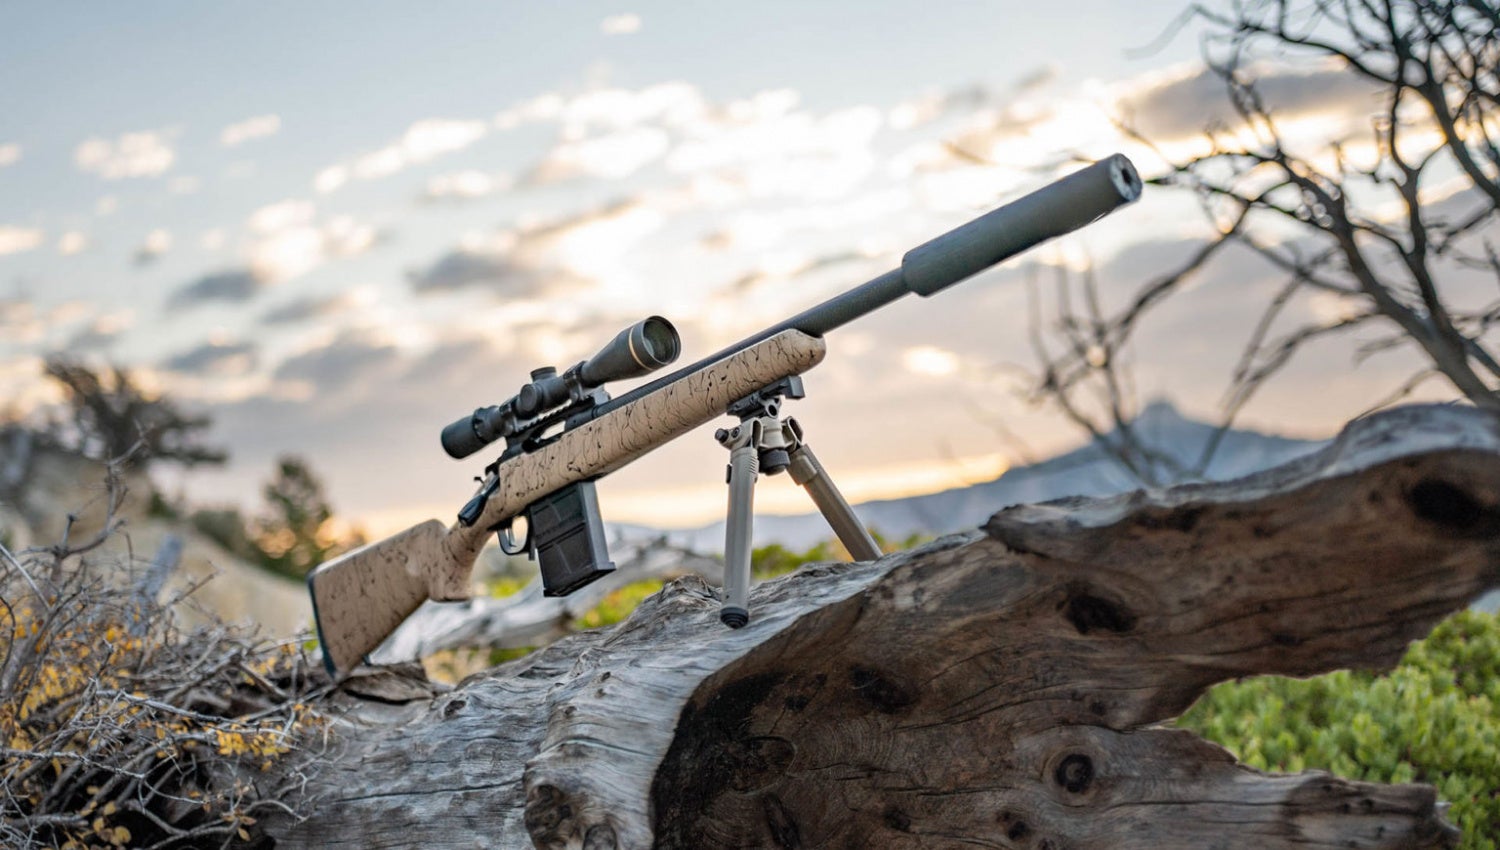 Introducing the Ridgeline Scout Rifle from Christensen Arms